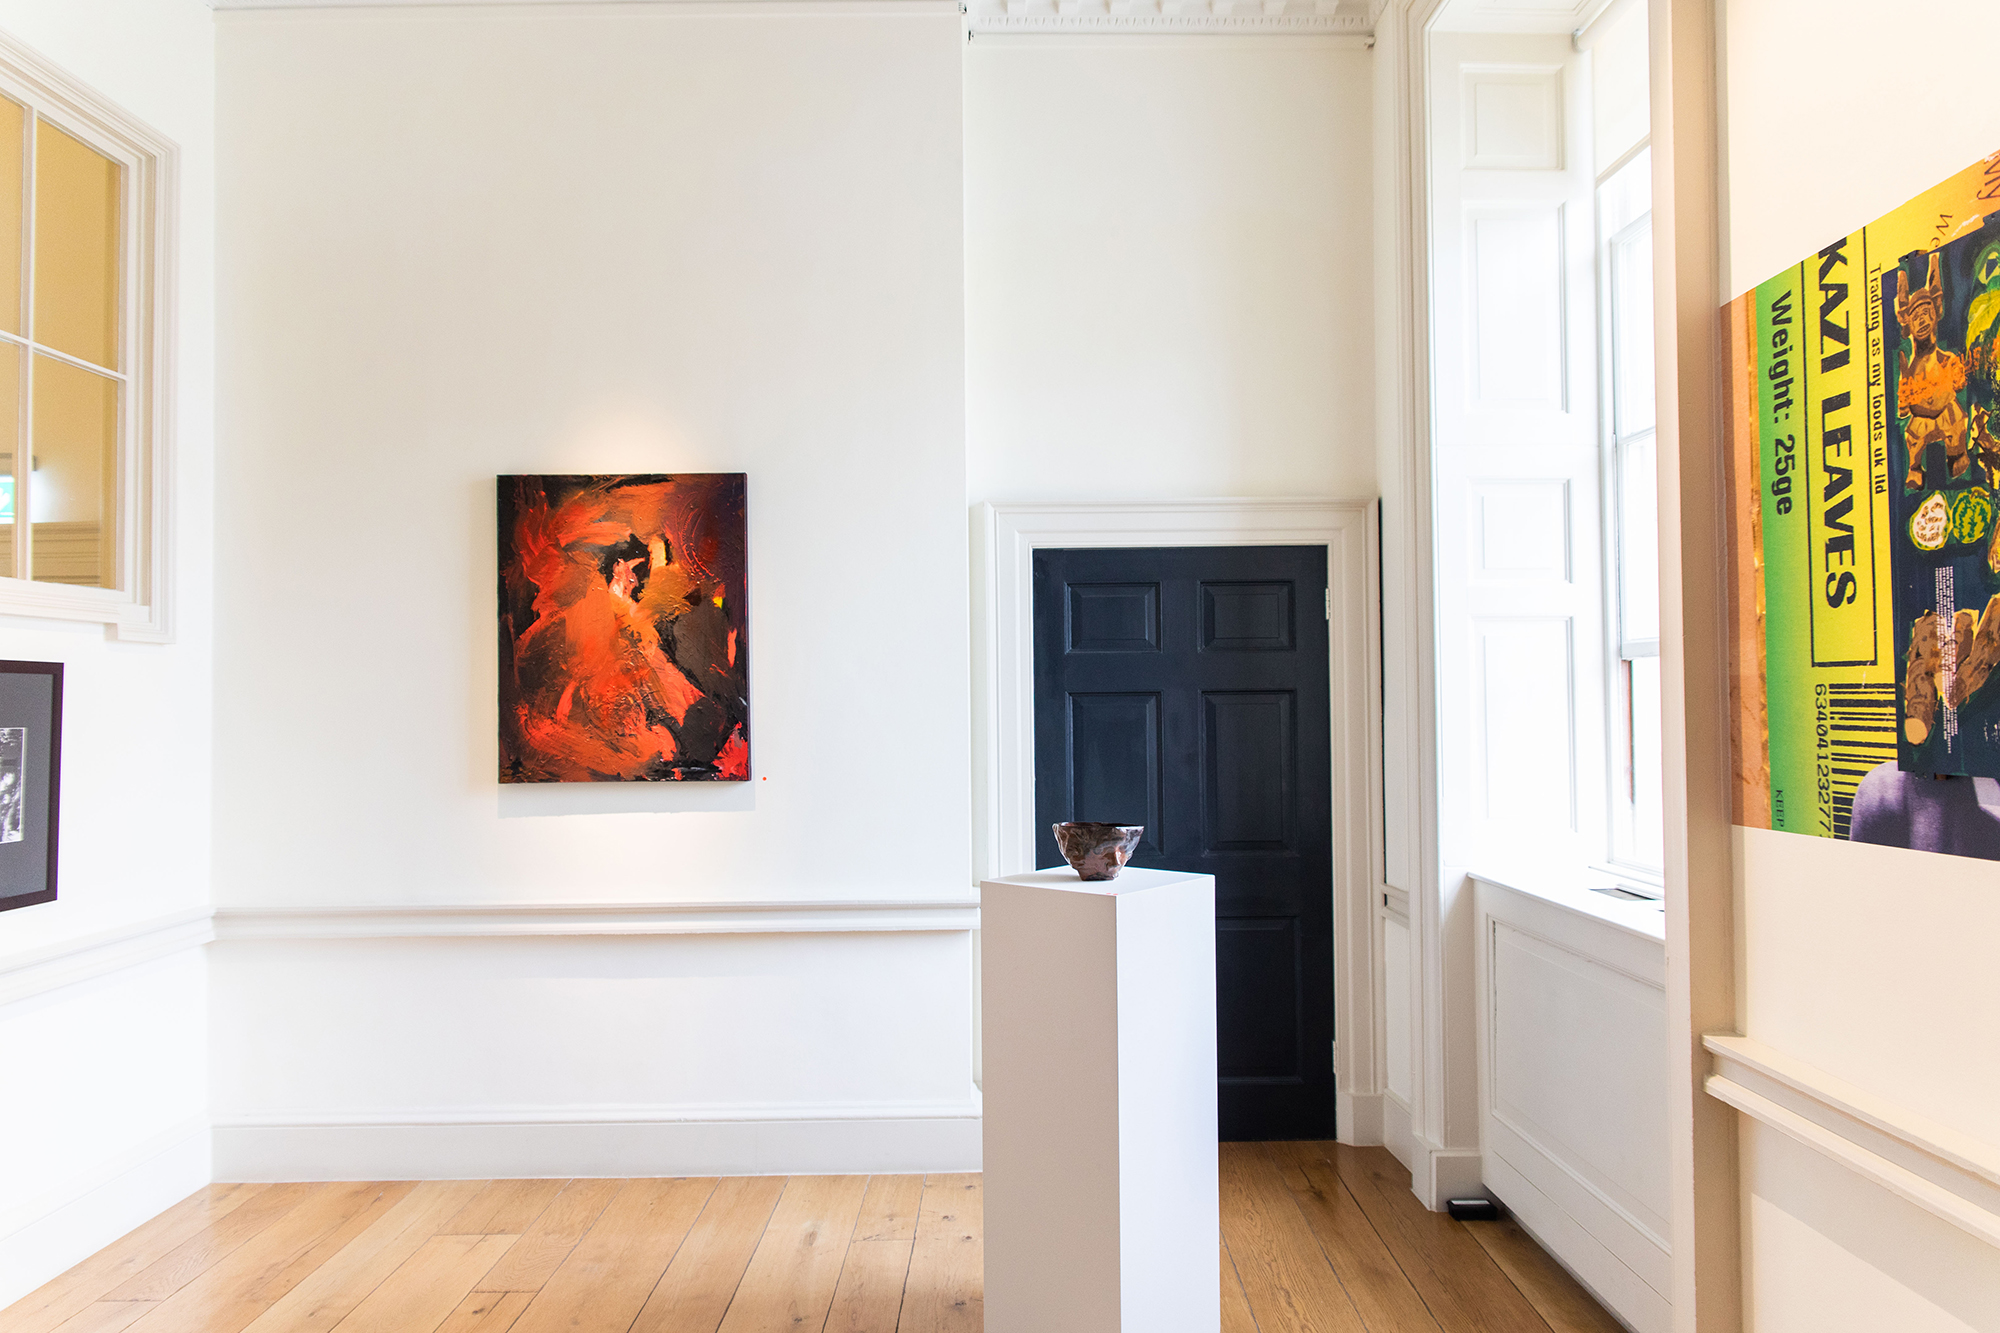 Gallery room showing a painting with abstract red shapes at the far back wall, a ceramic vessel on top of a white plinth and in front of a black door, and a half-cut out of the frame collage on the right.